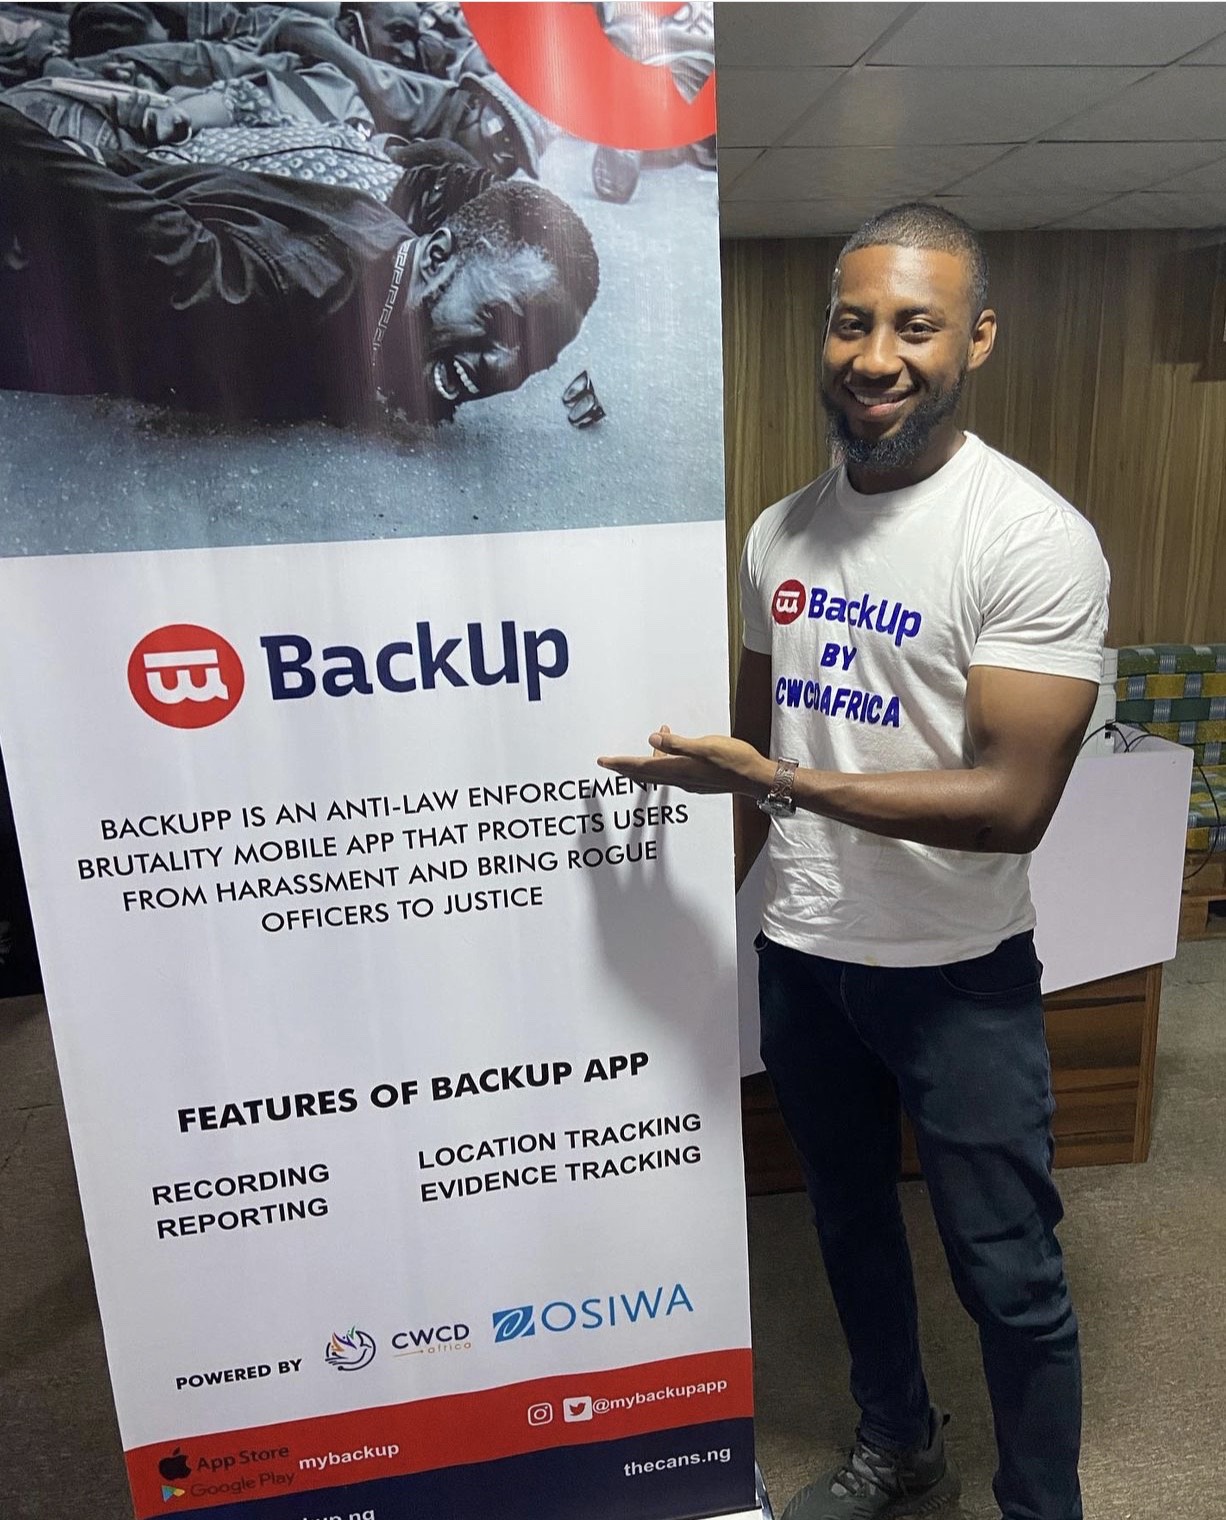 Press statement:  Less than six months after launch, Backup reaches over 10,000 people with stories of Hope.